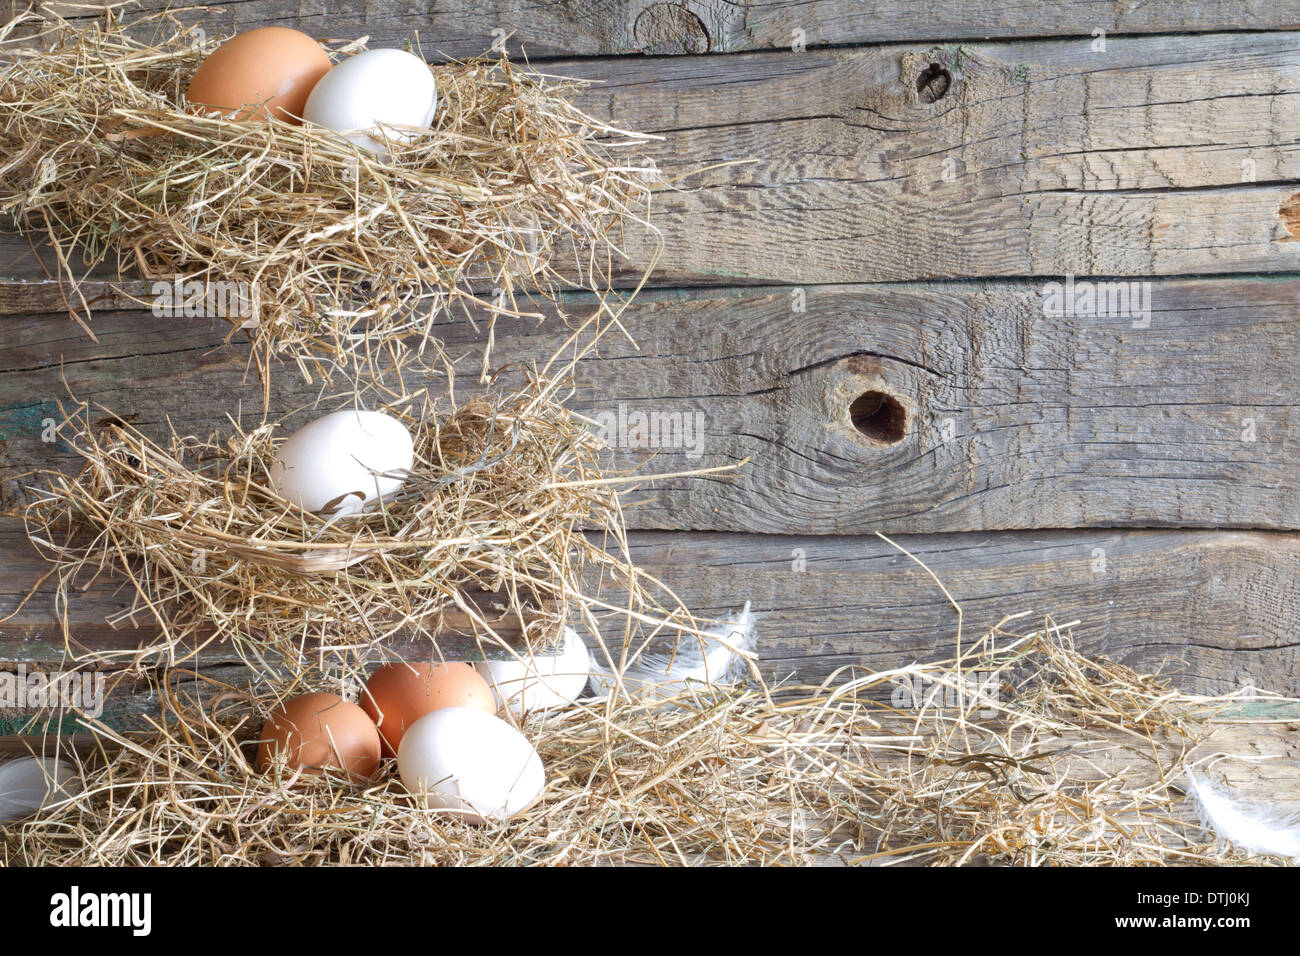 Abstract easter organic eggs on vintage boards in chicken coop concept Stock Photo